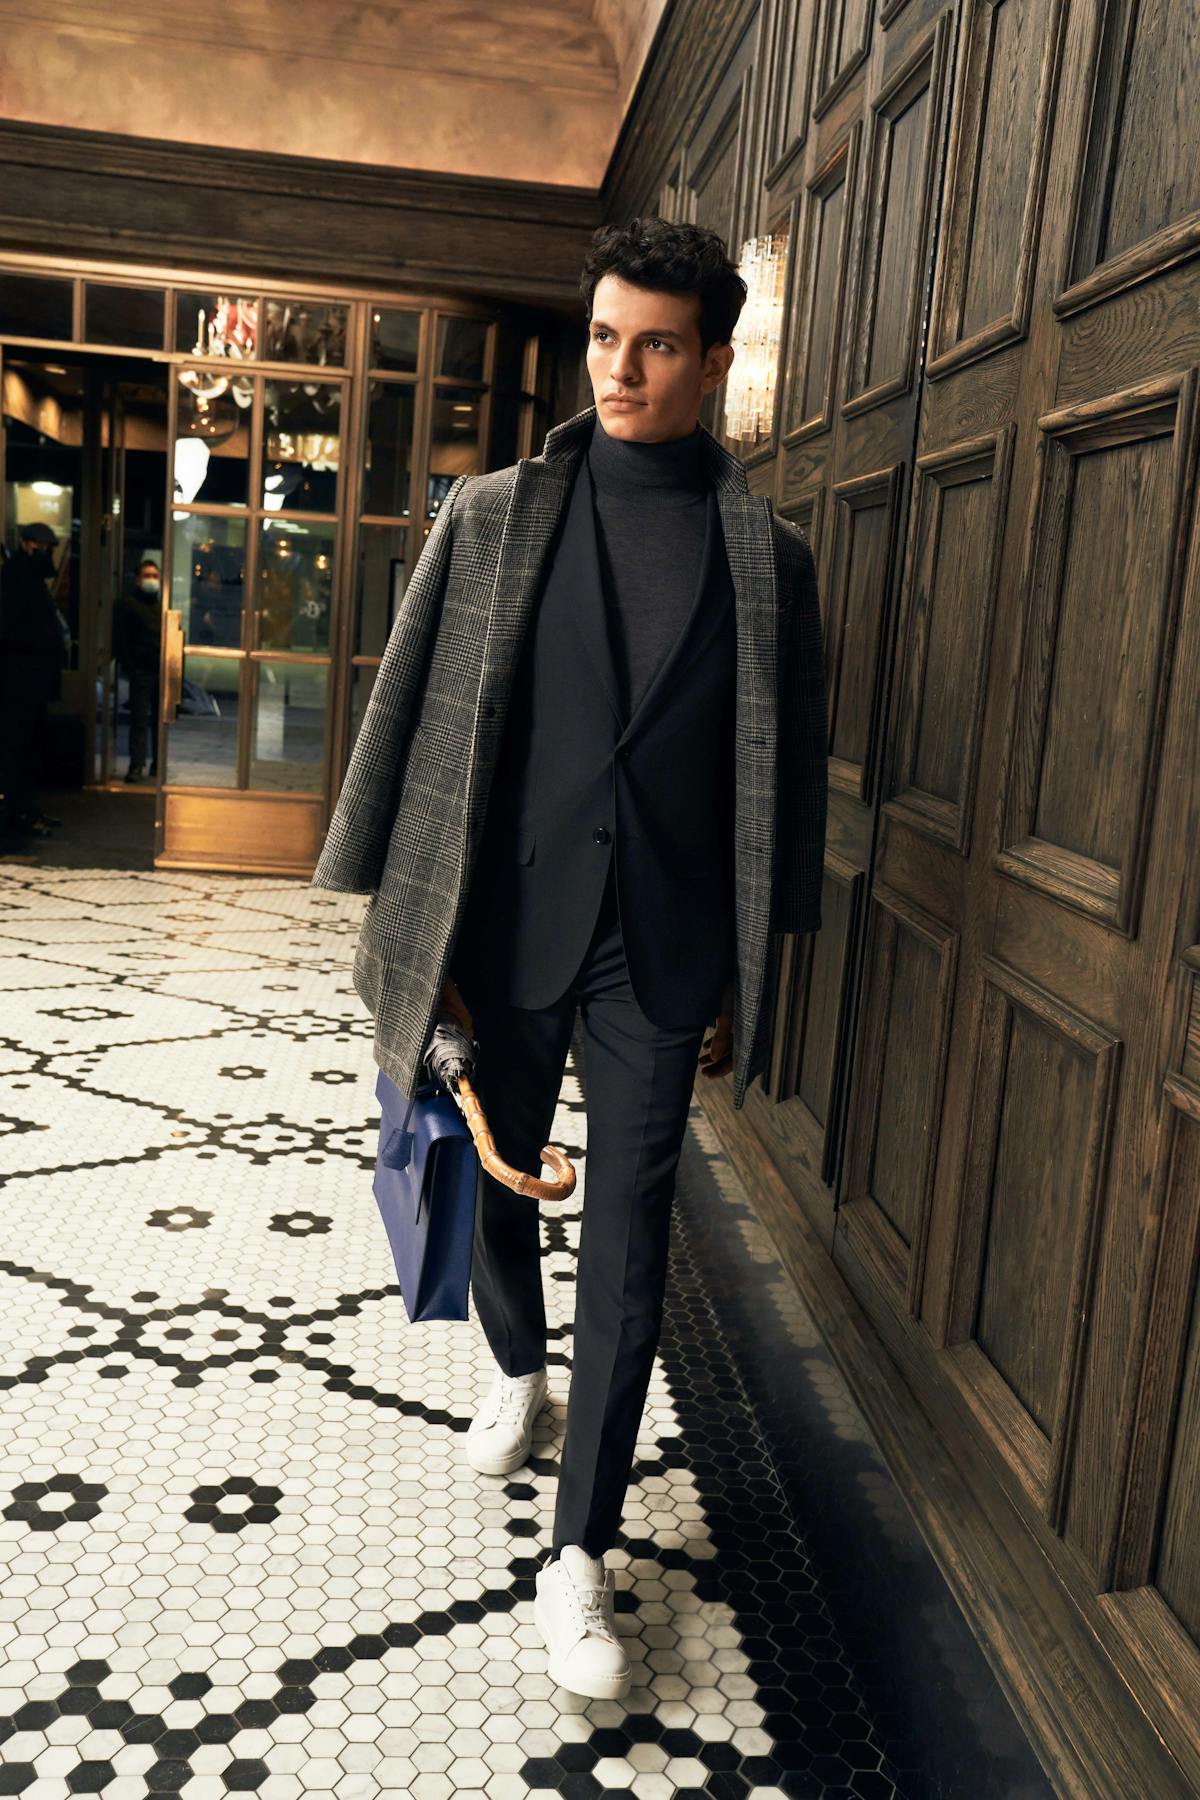 Layered suit workwear outfit with a dark grey men's suit, turtleneck, and overcoat for suits paired with a briefcase.